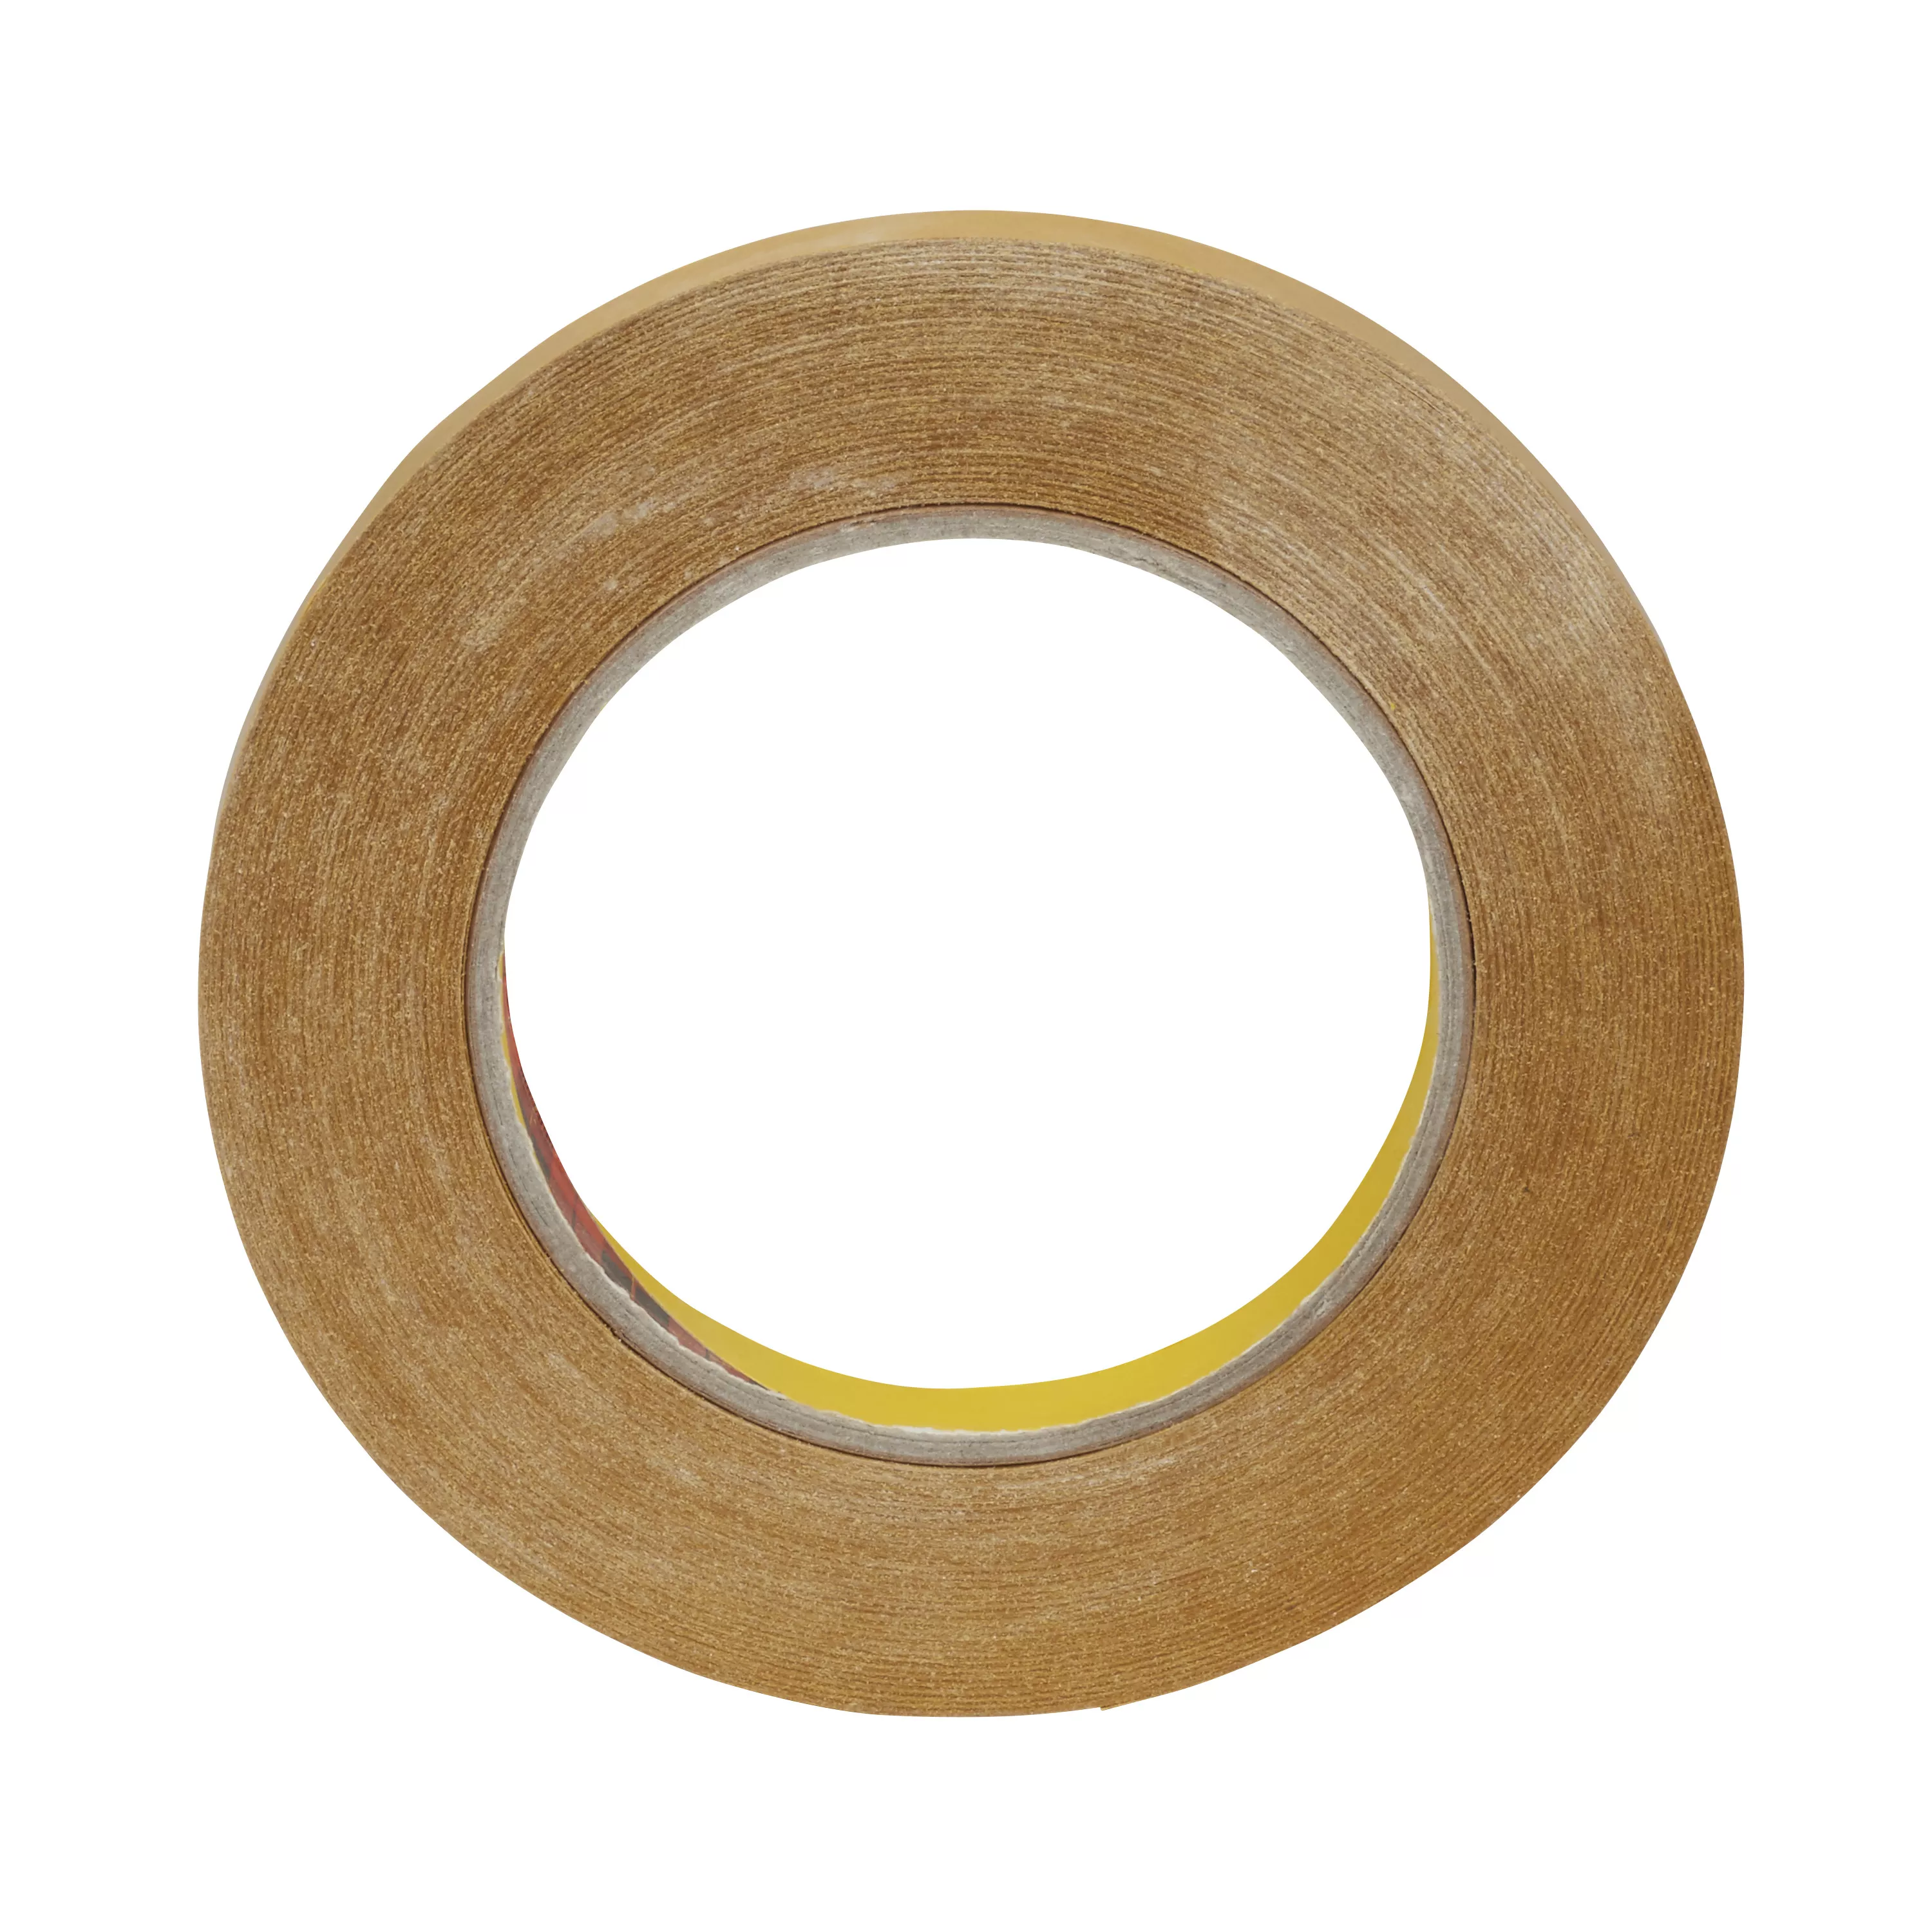 Product Number 927 | 3M™ Adhesive Transfer Tape 927